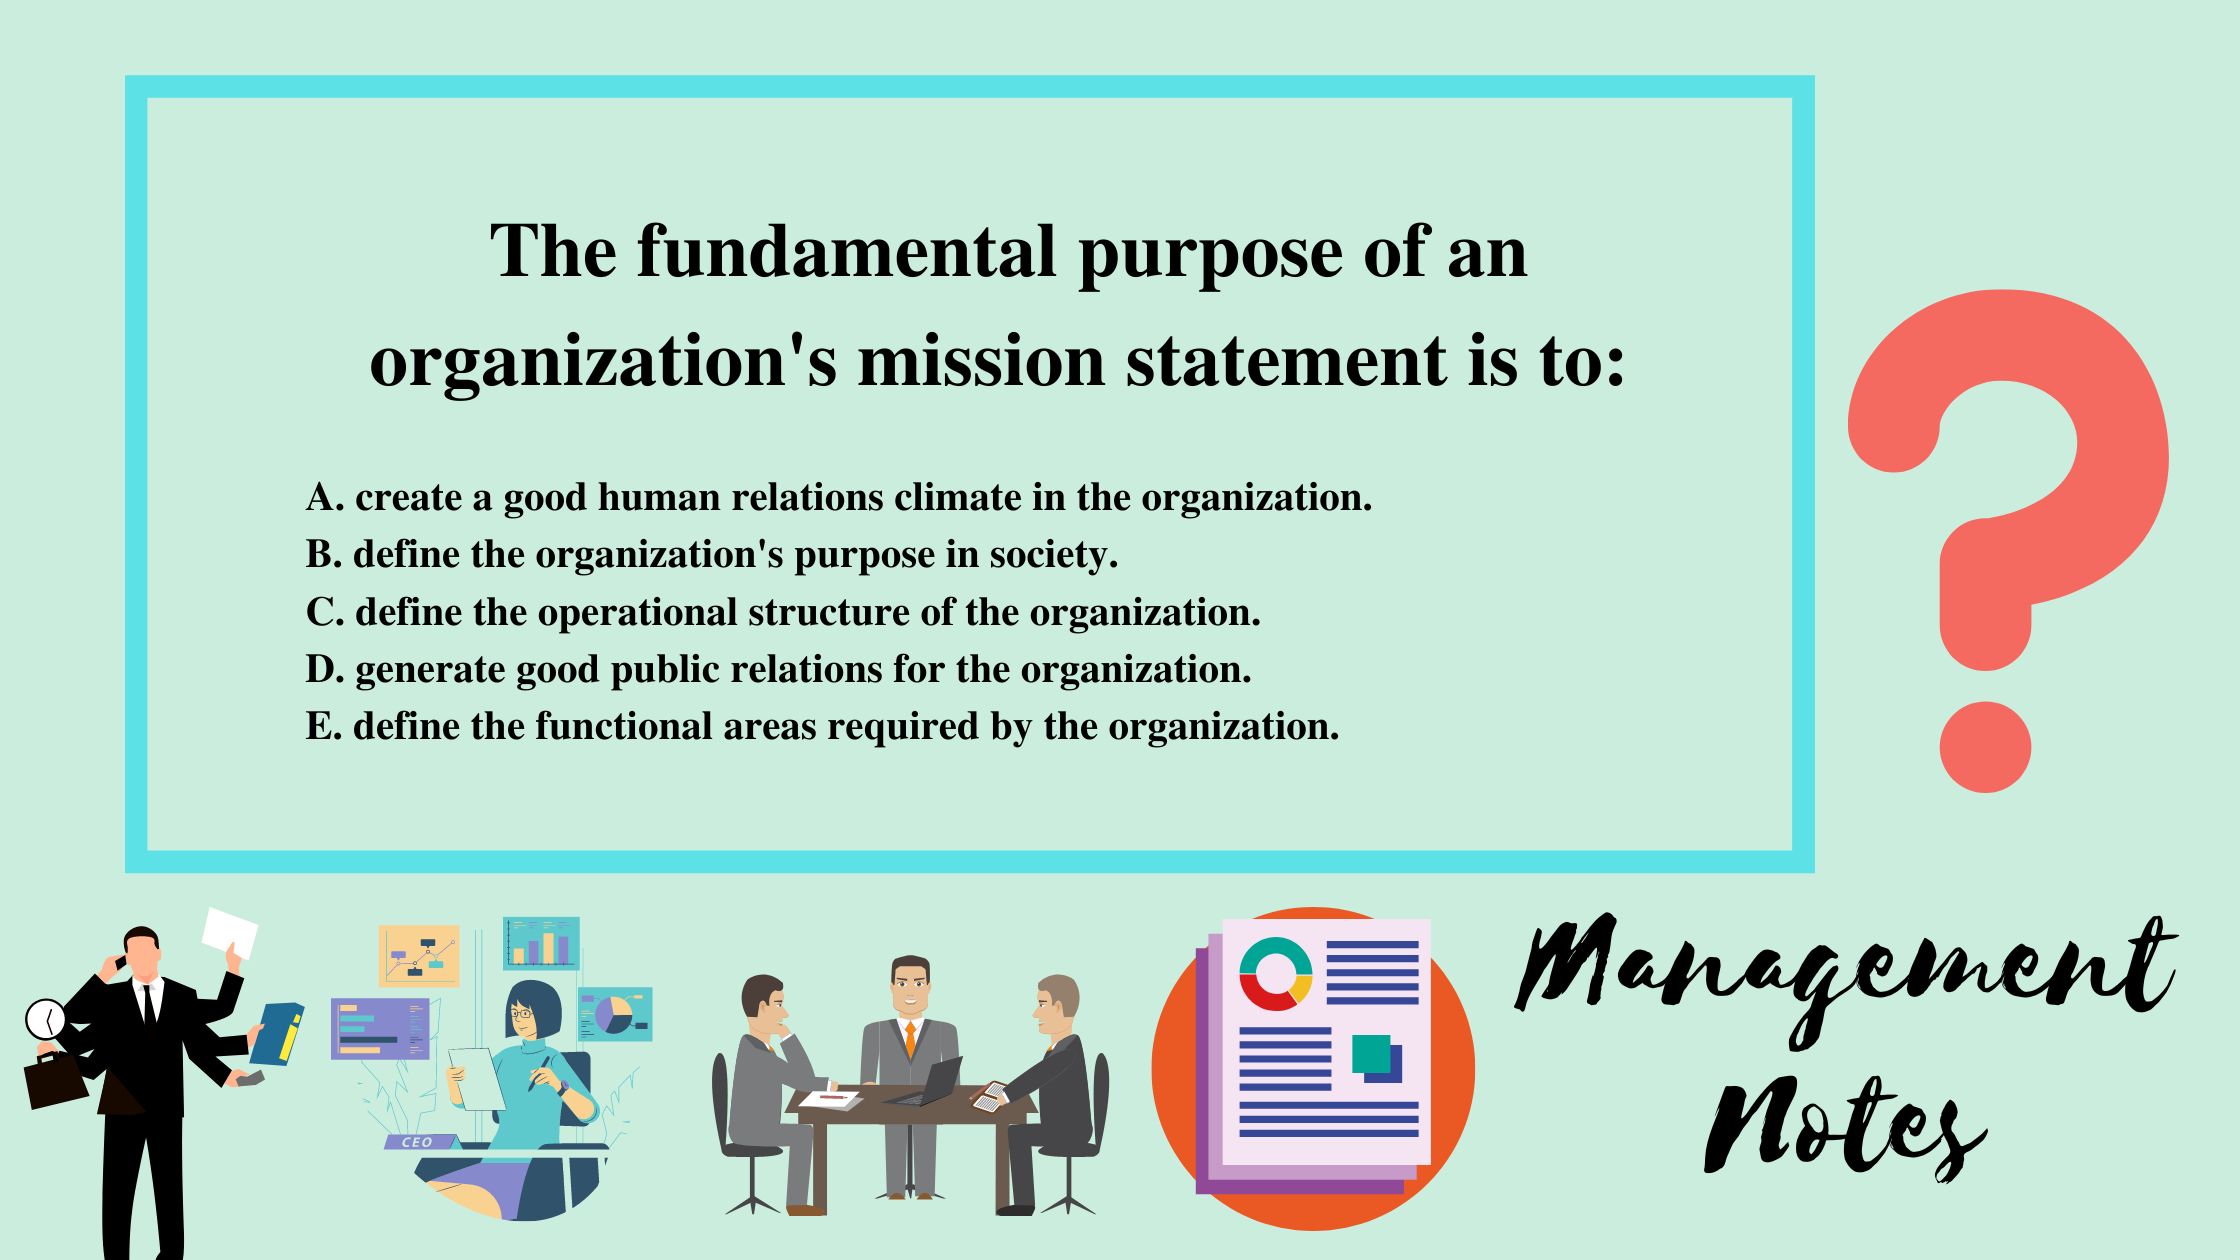 The fundamental purpose of an organization's mission statement is to: